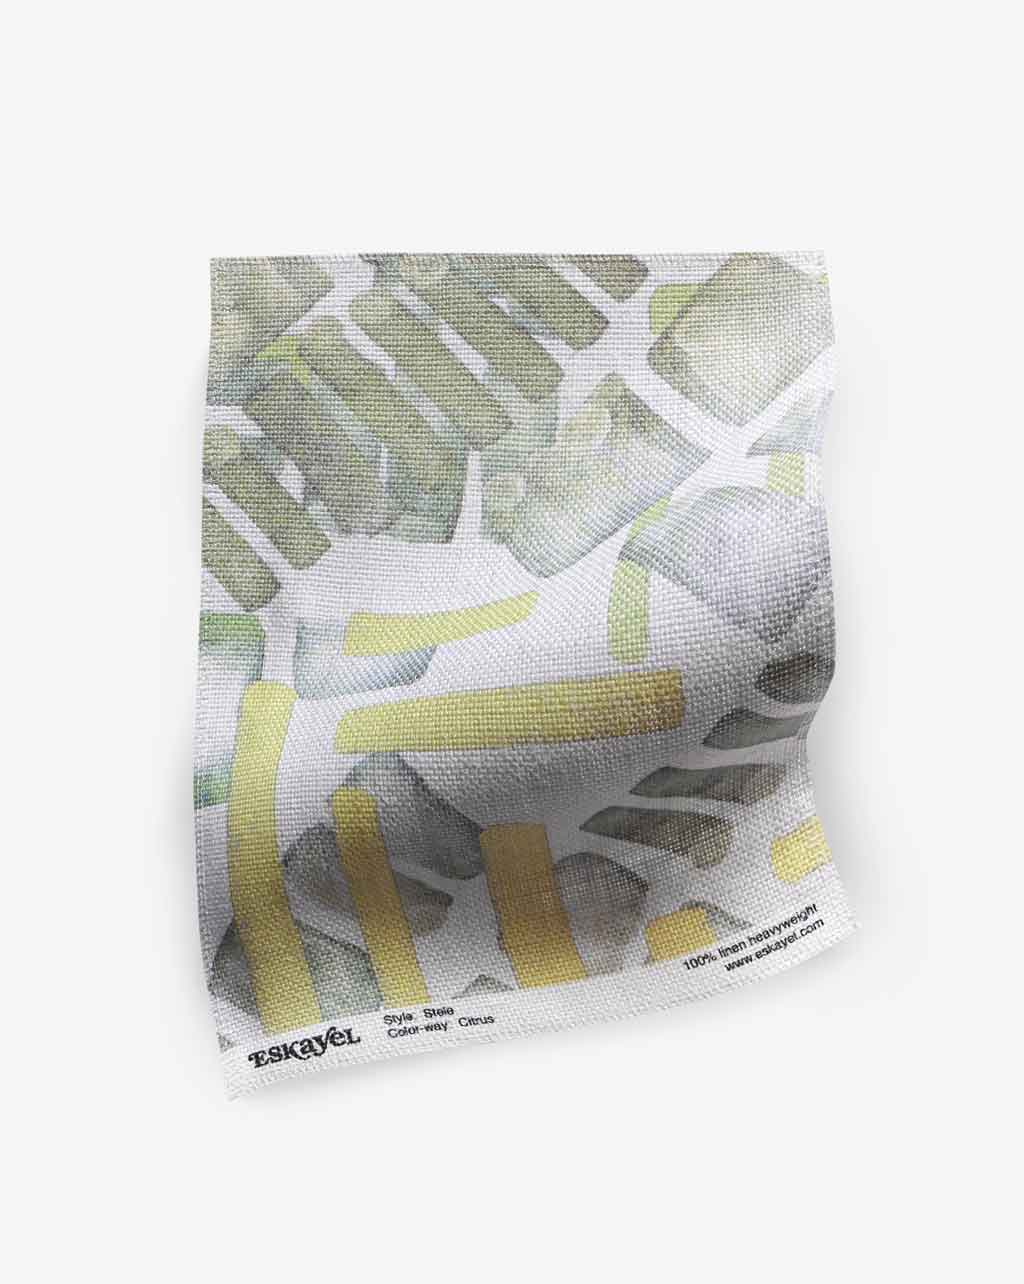 A luxury high-end Stele Fabric Citrus fabric with a yellow and white graphic pattern on it